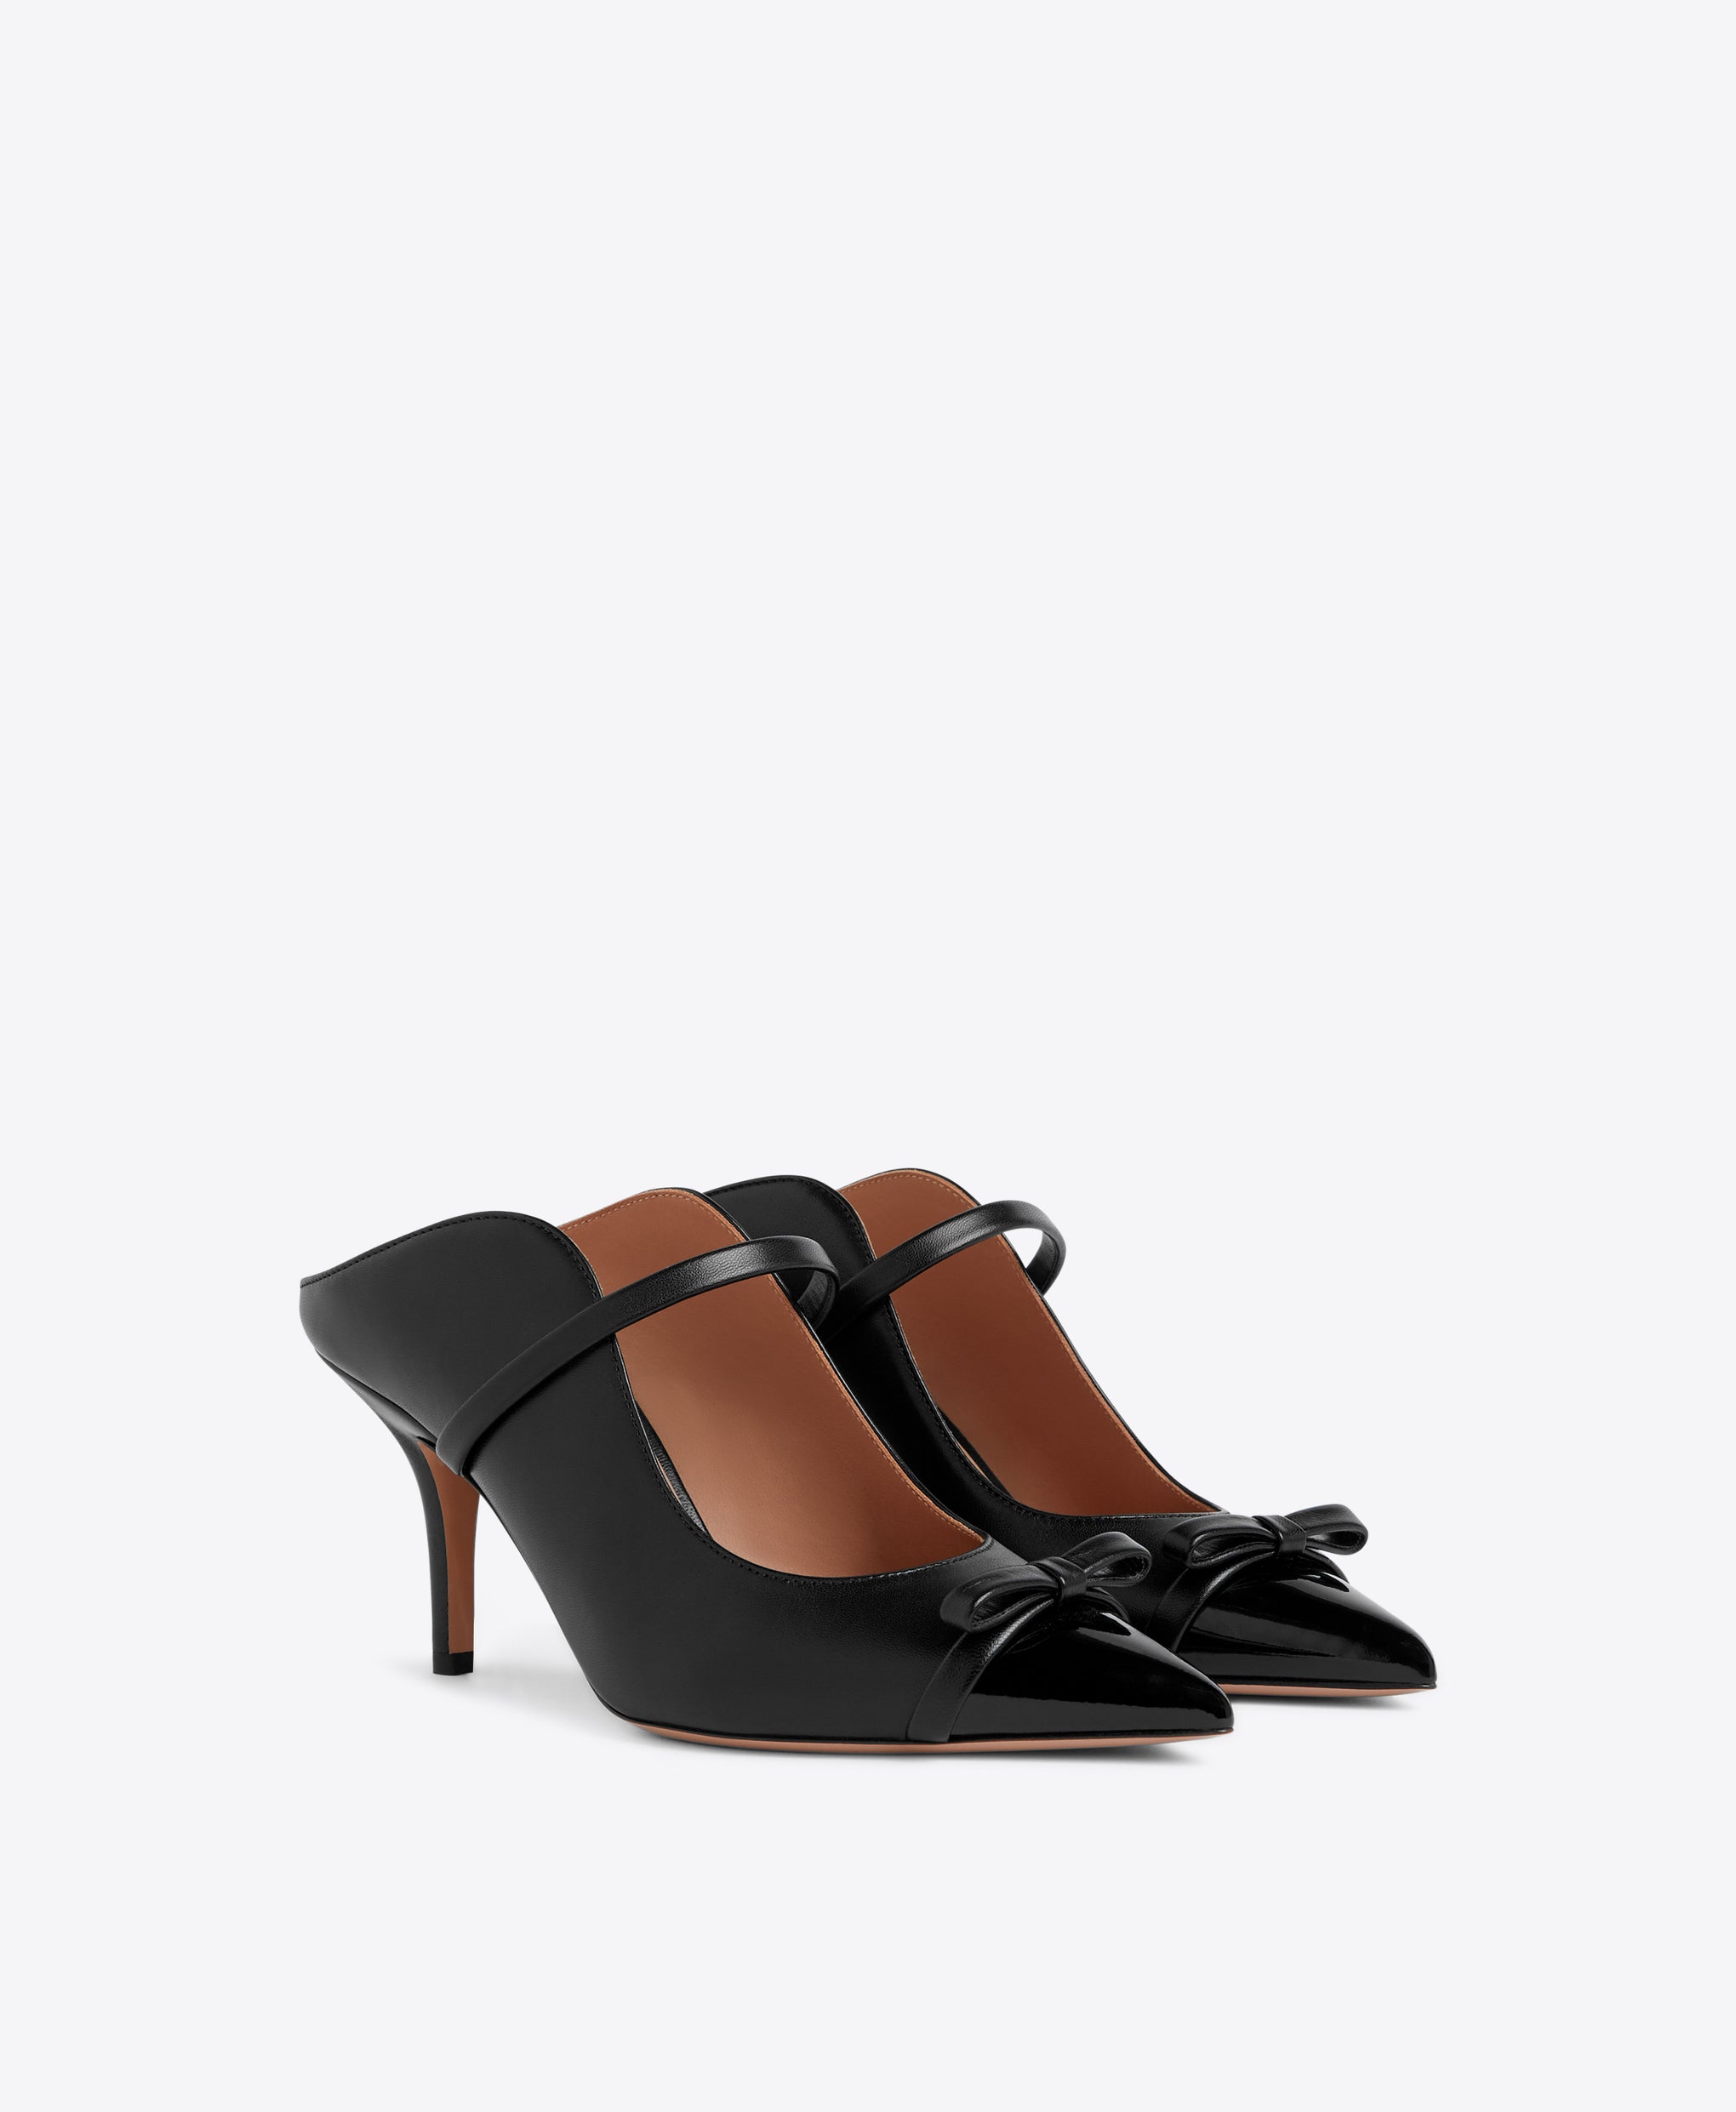 Malone Souliers Blanca 70 Black Leather Heeled Mules